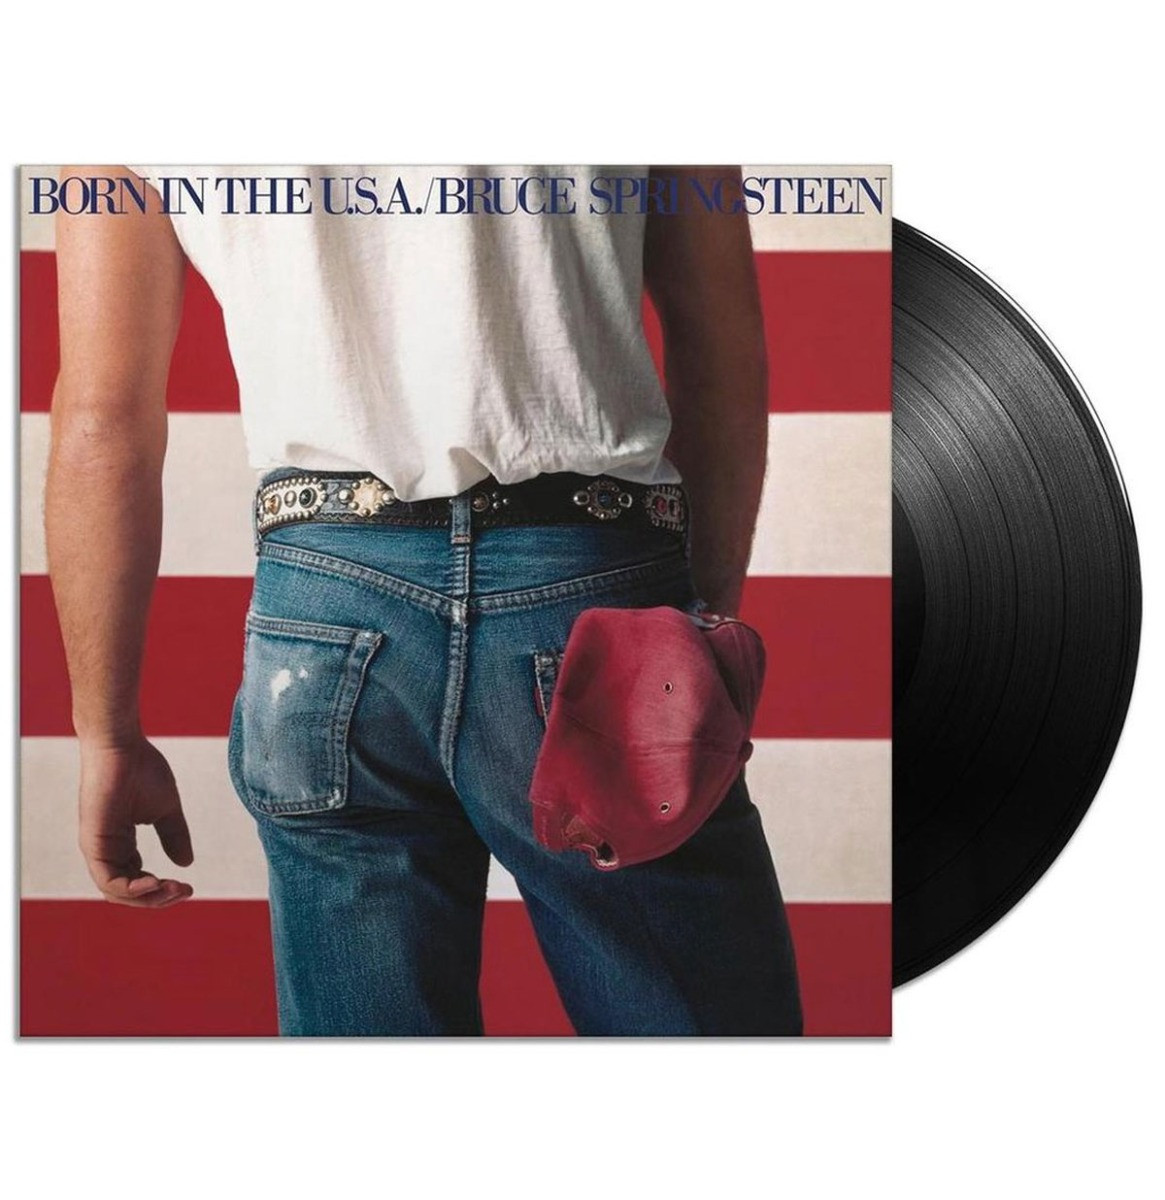 Bruce Springsteen - Born In The USA LP